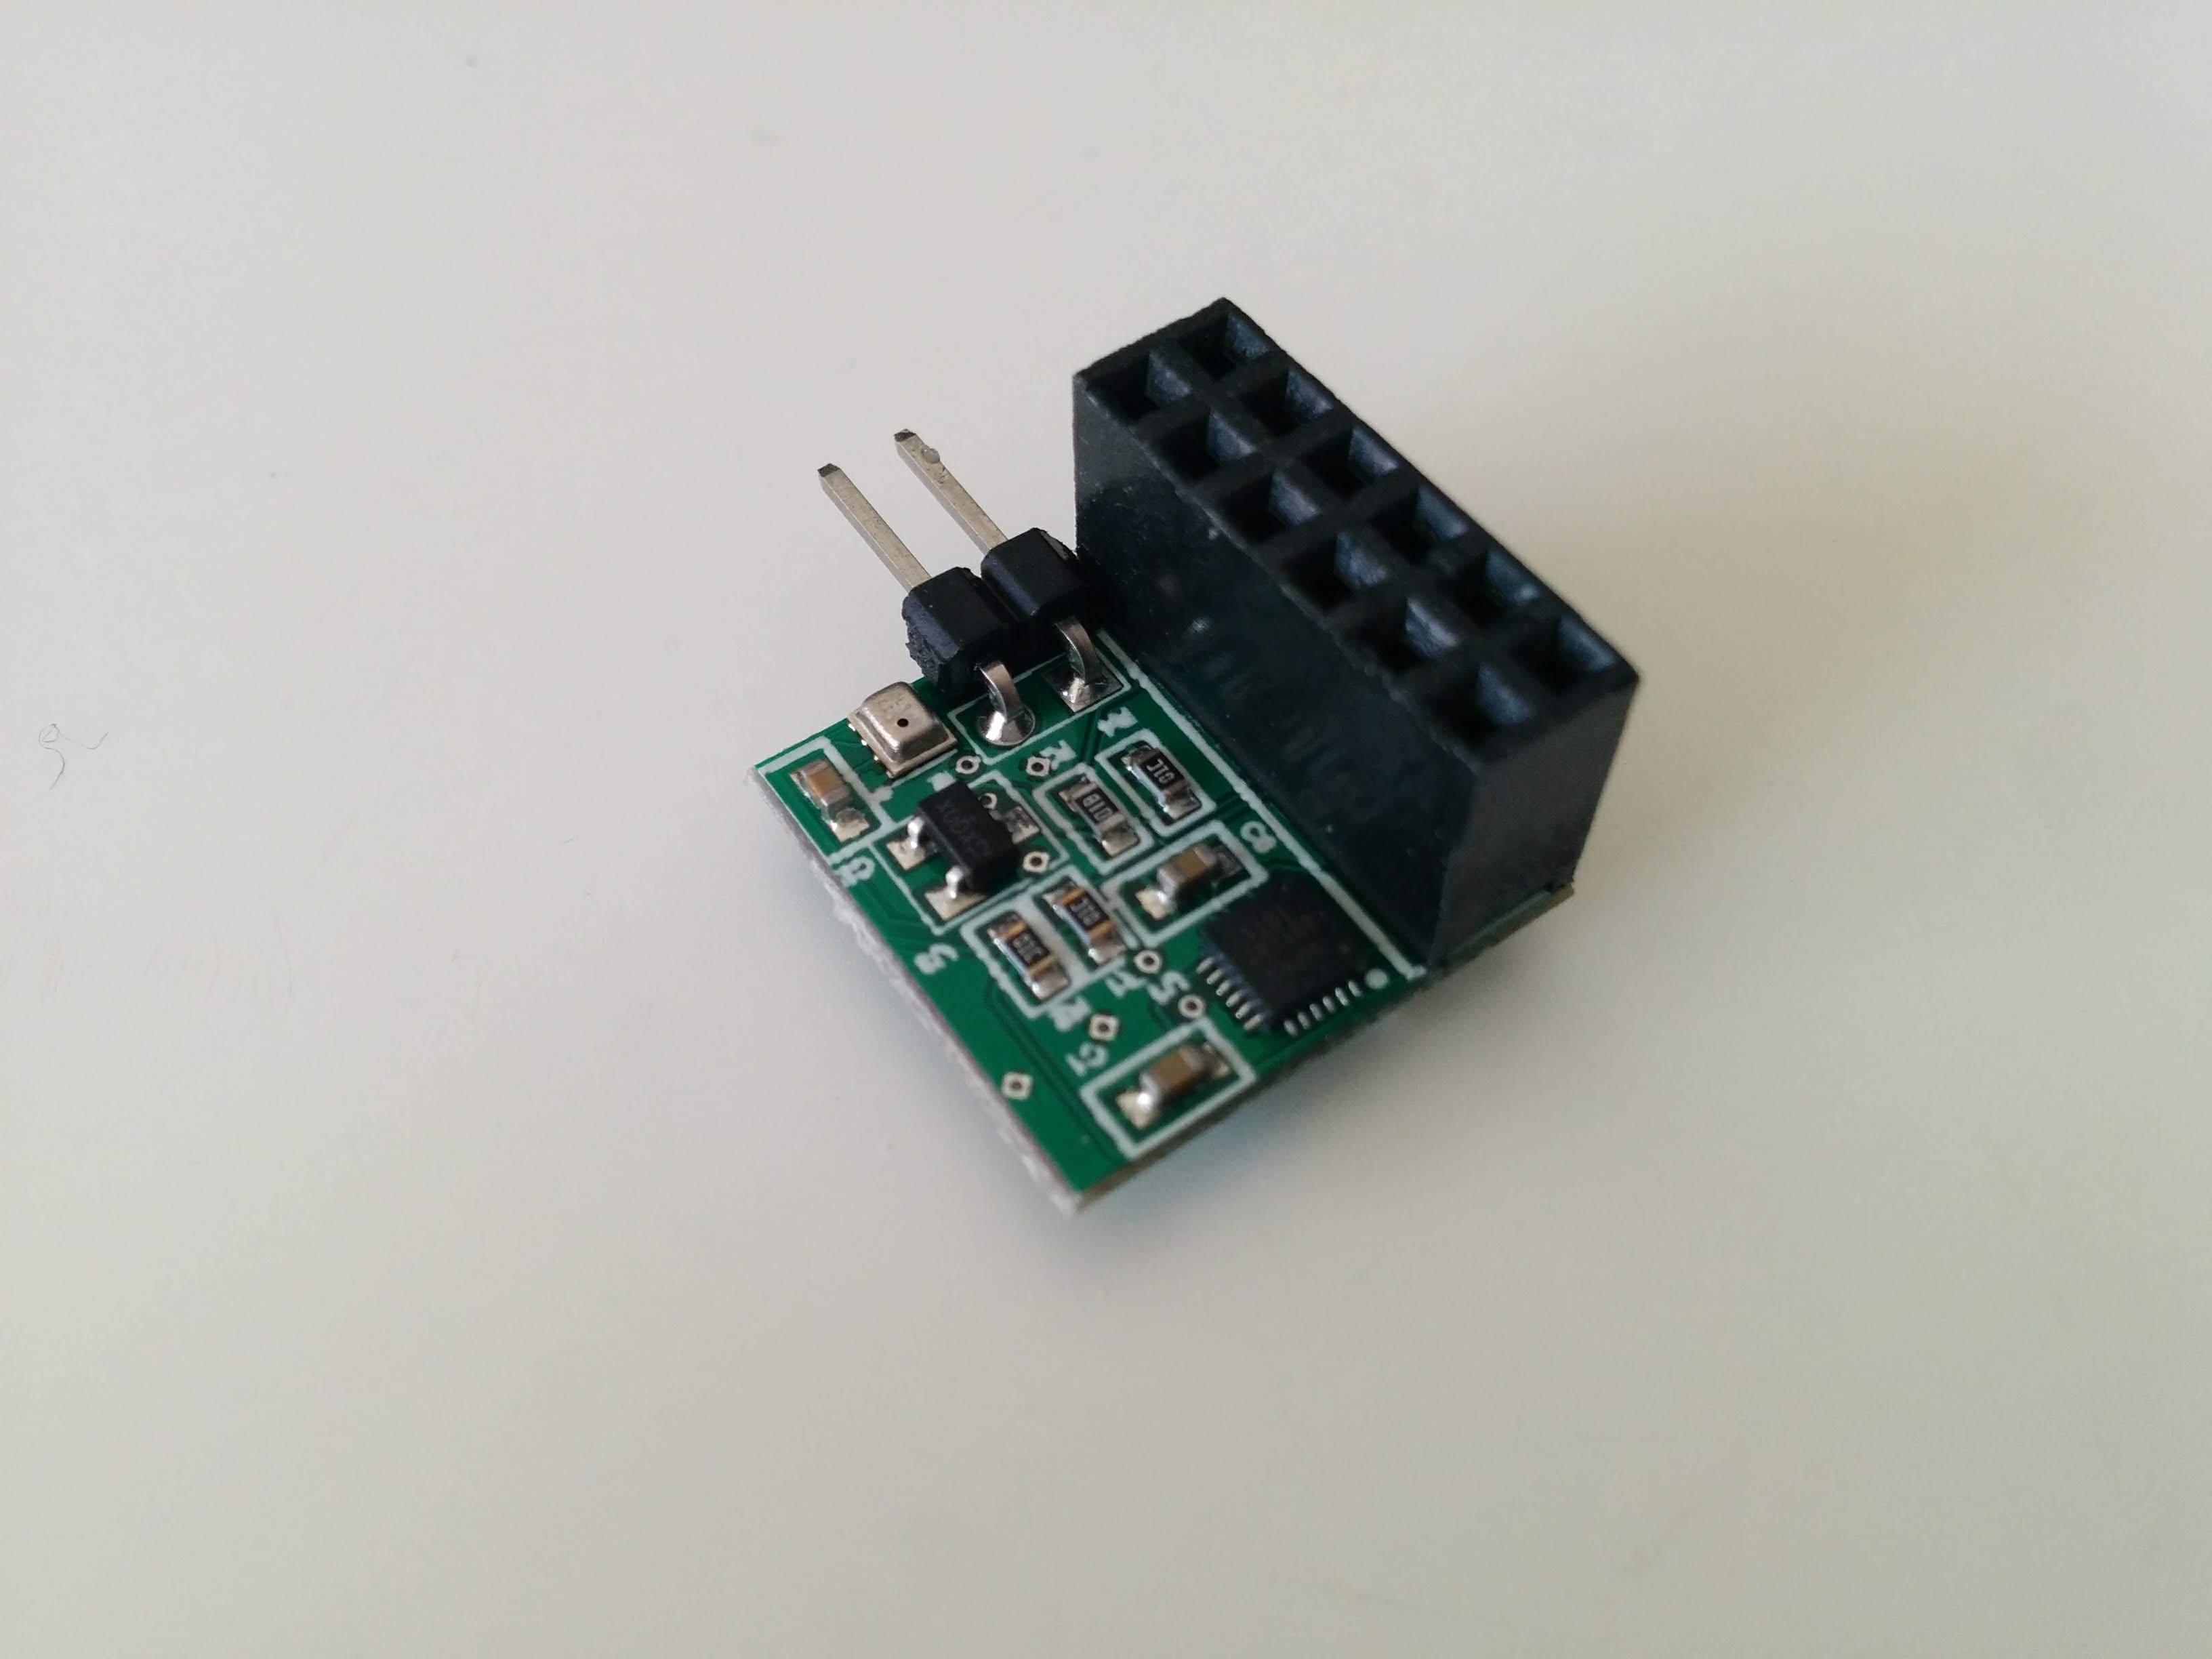 How to Run FaBo9Axis_MPU9250 on Raspberry Pi with Python3